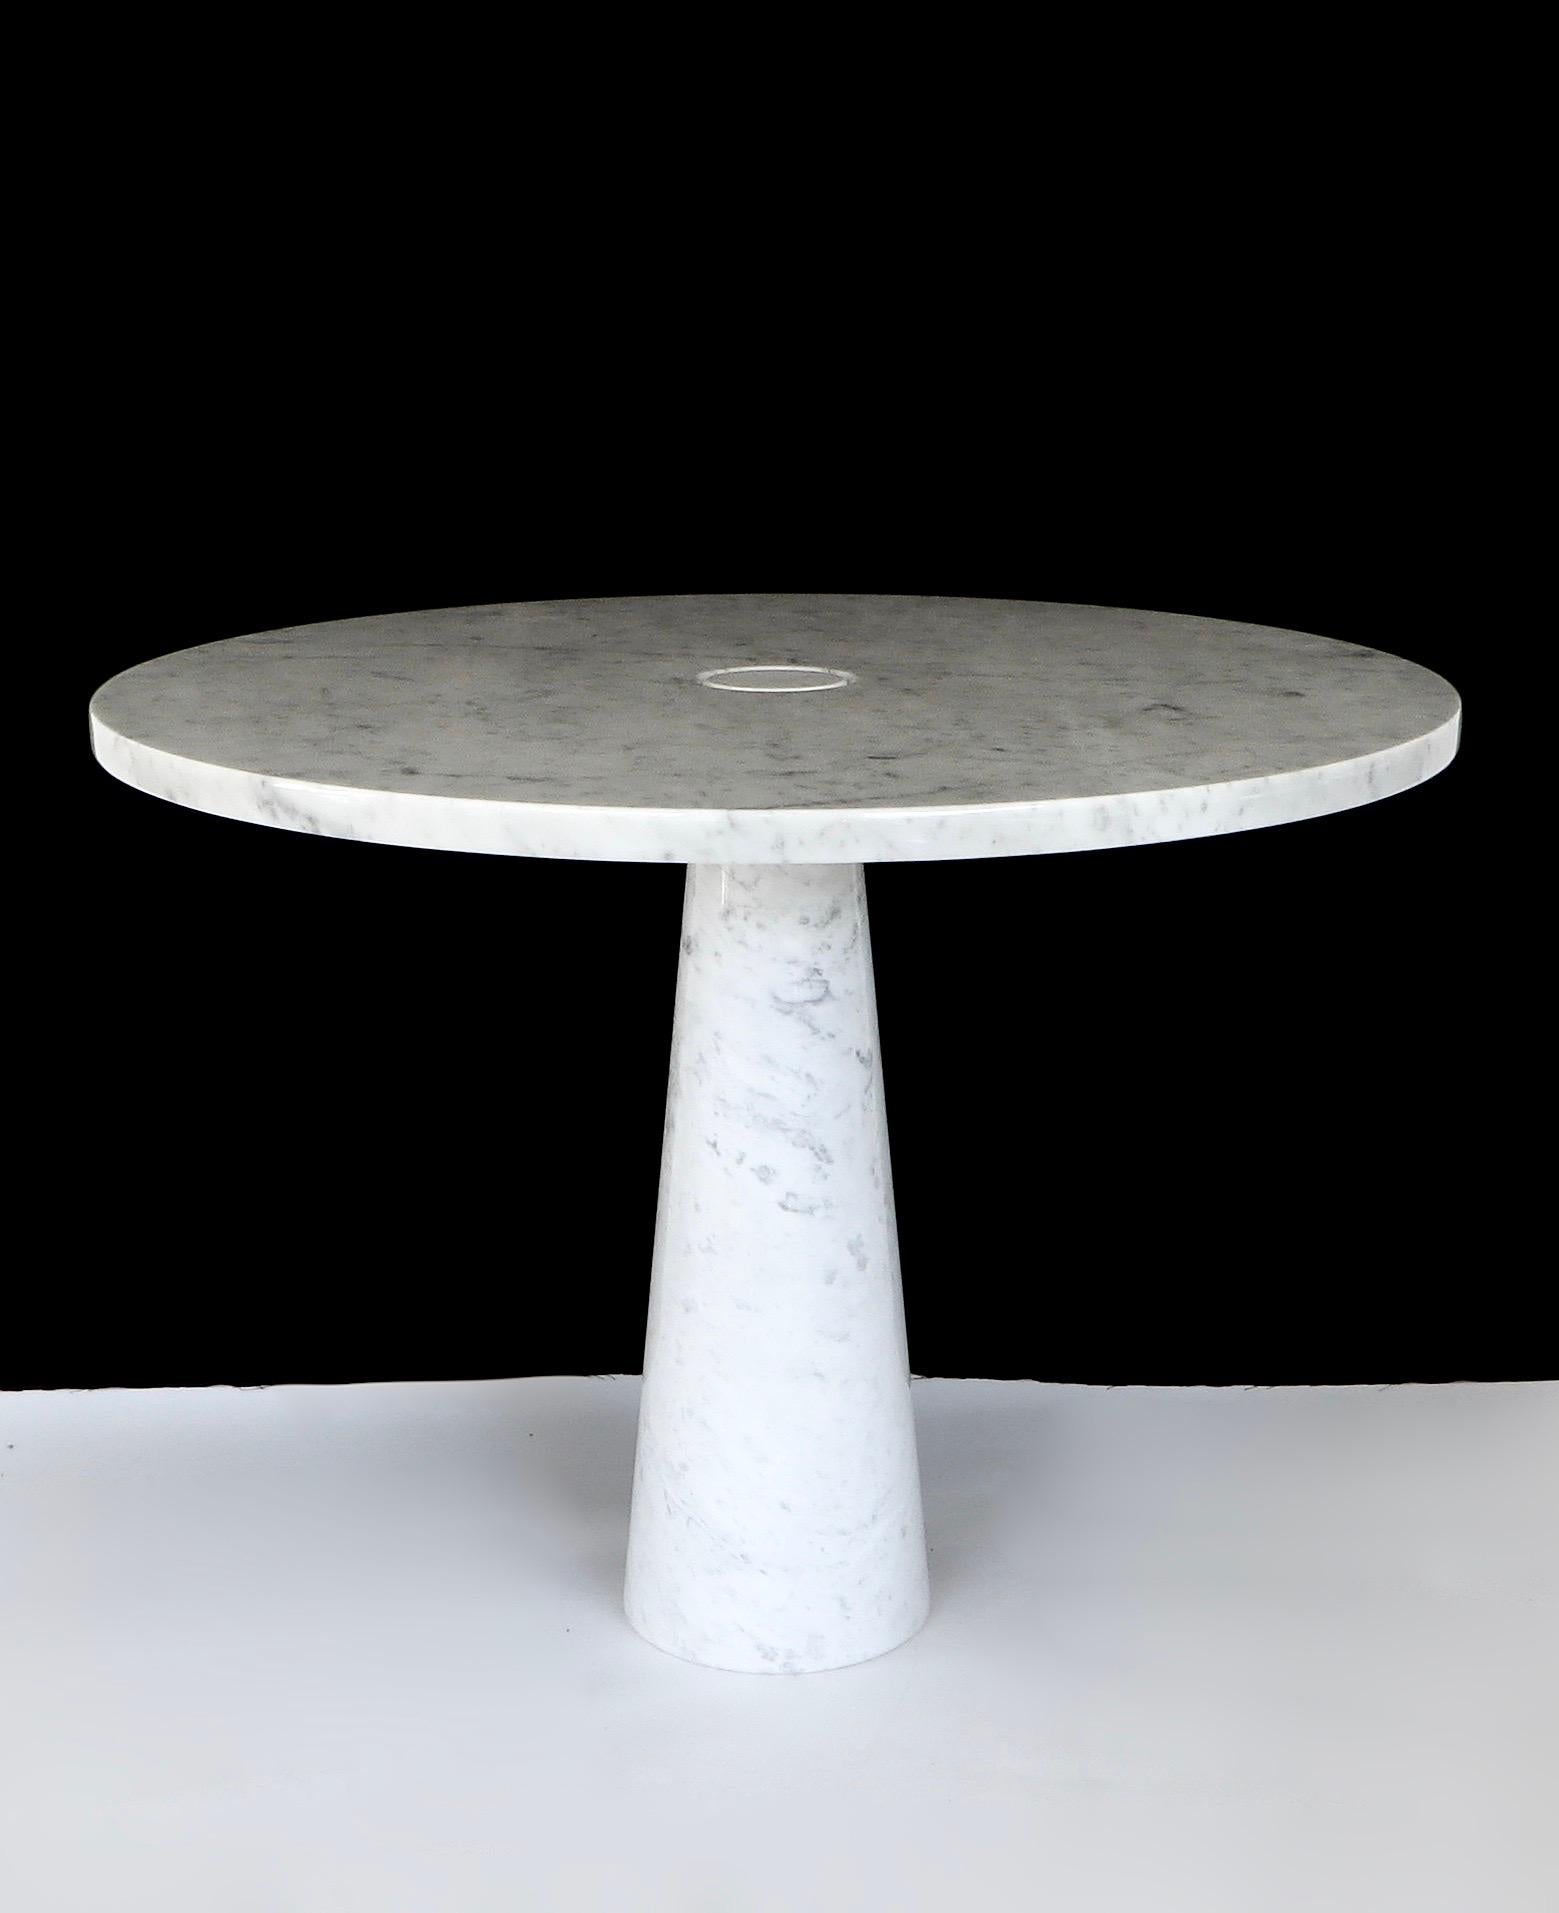 Late 20th Century Angelo Mangiarotti Italian Dining Table for Skipper Eros Collection Vintage